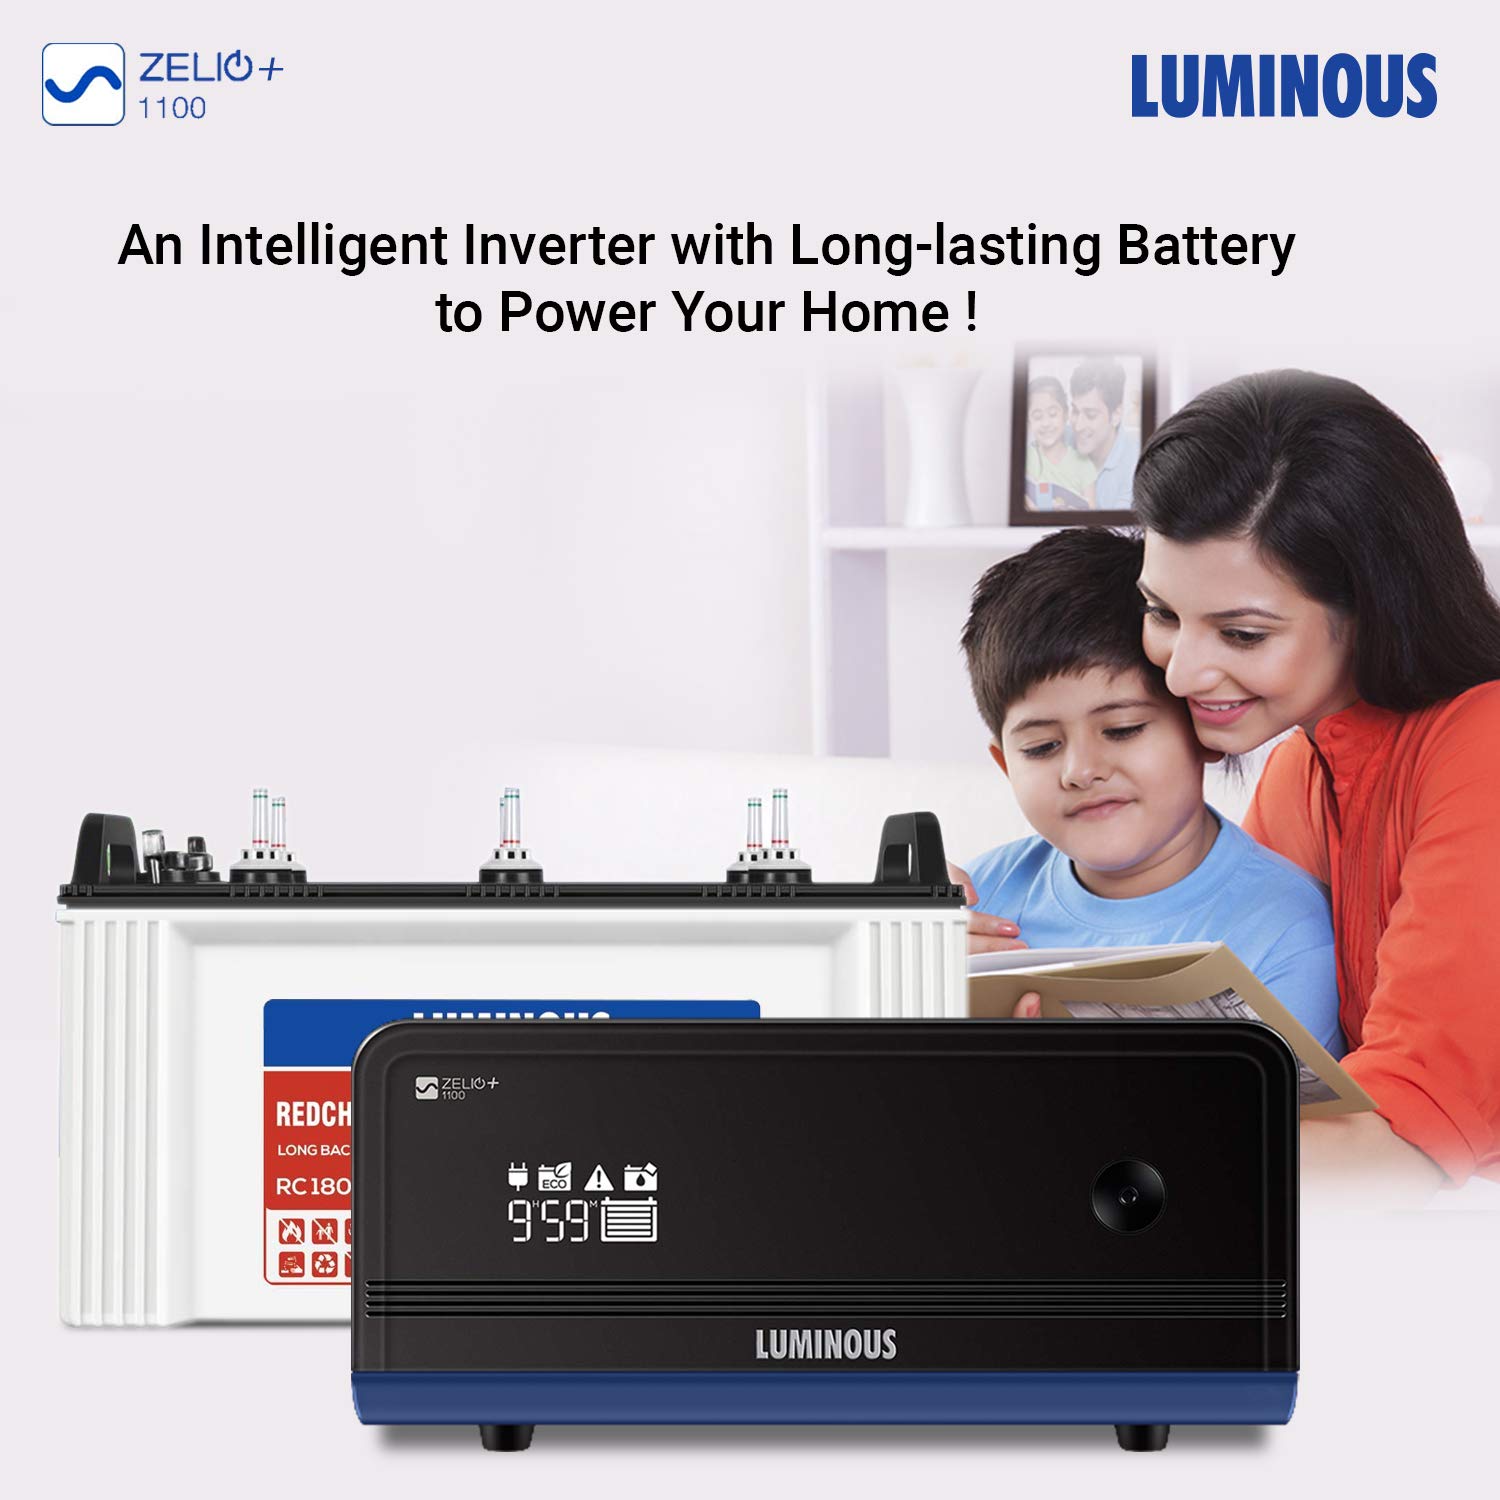 Luminous Zelio+ 1100 Pure Sine Wave UPS with Red Charge RC 15000 Tubular 120Ah Battery with Trolley Combo for Home, Office & Shops